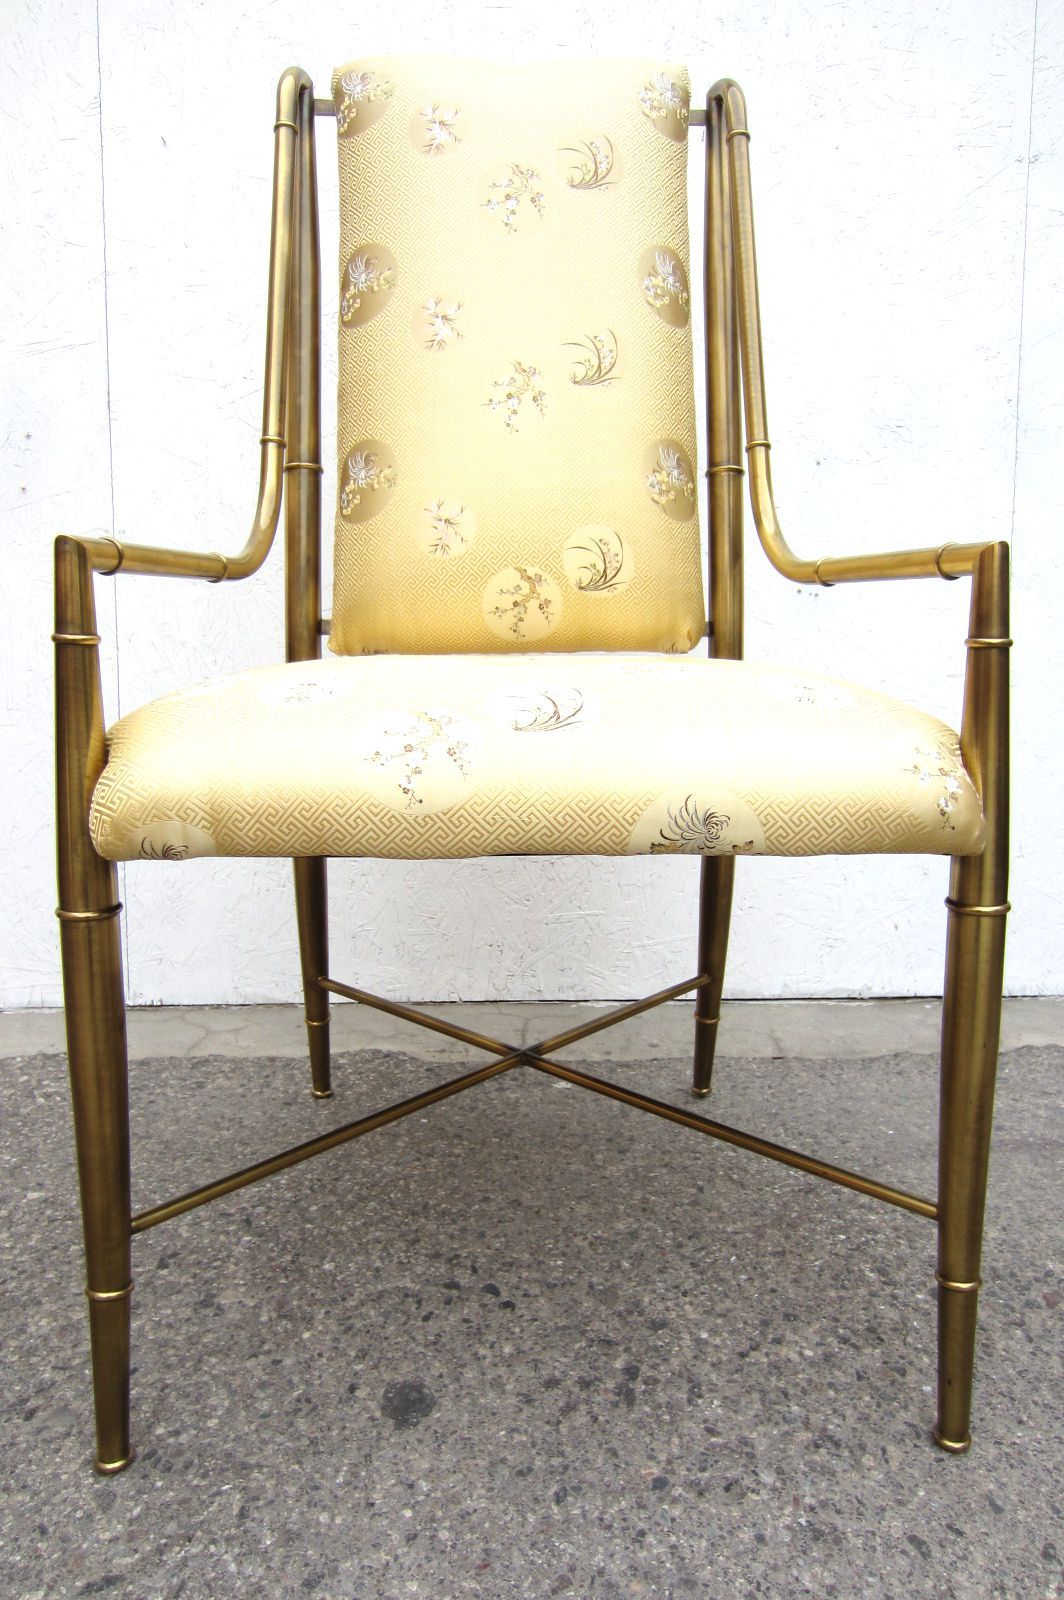 American Mastercraft Furniture Brass Faux Bamboo Dining Chairs Set of Six, 1970s